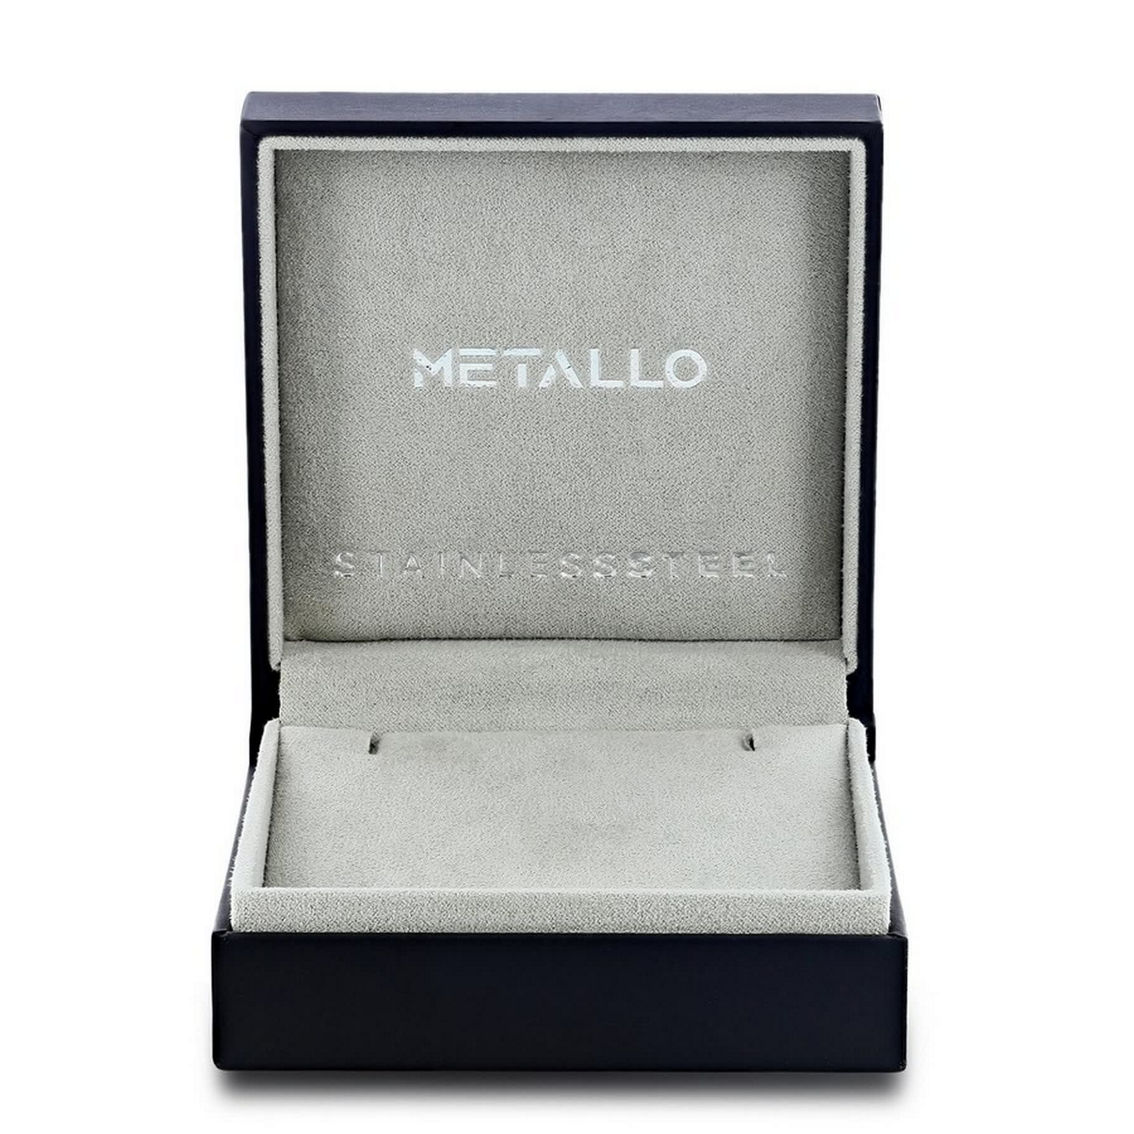 Metallo Stainless Steel Brushed & Polished CZ Cross Necklace - Image 2 of 3